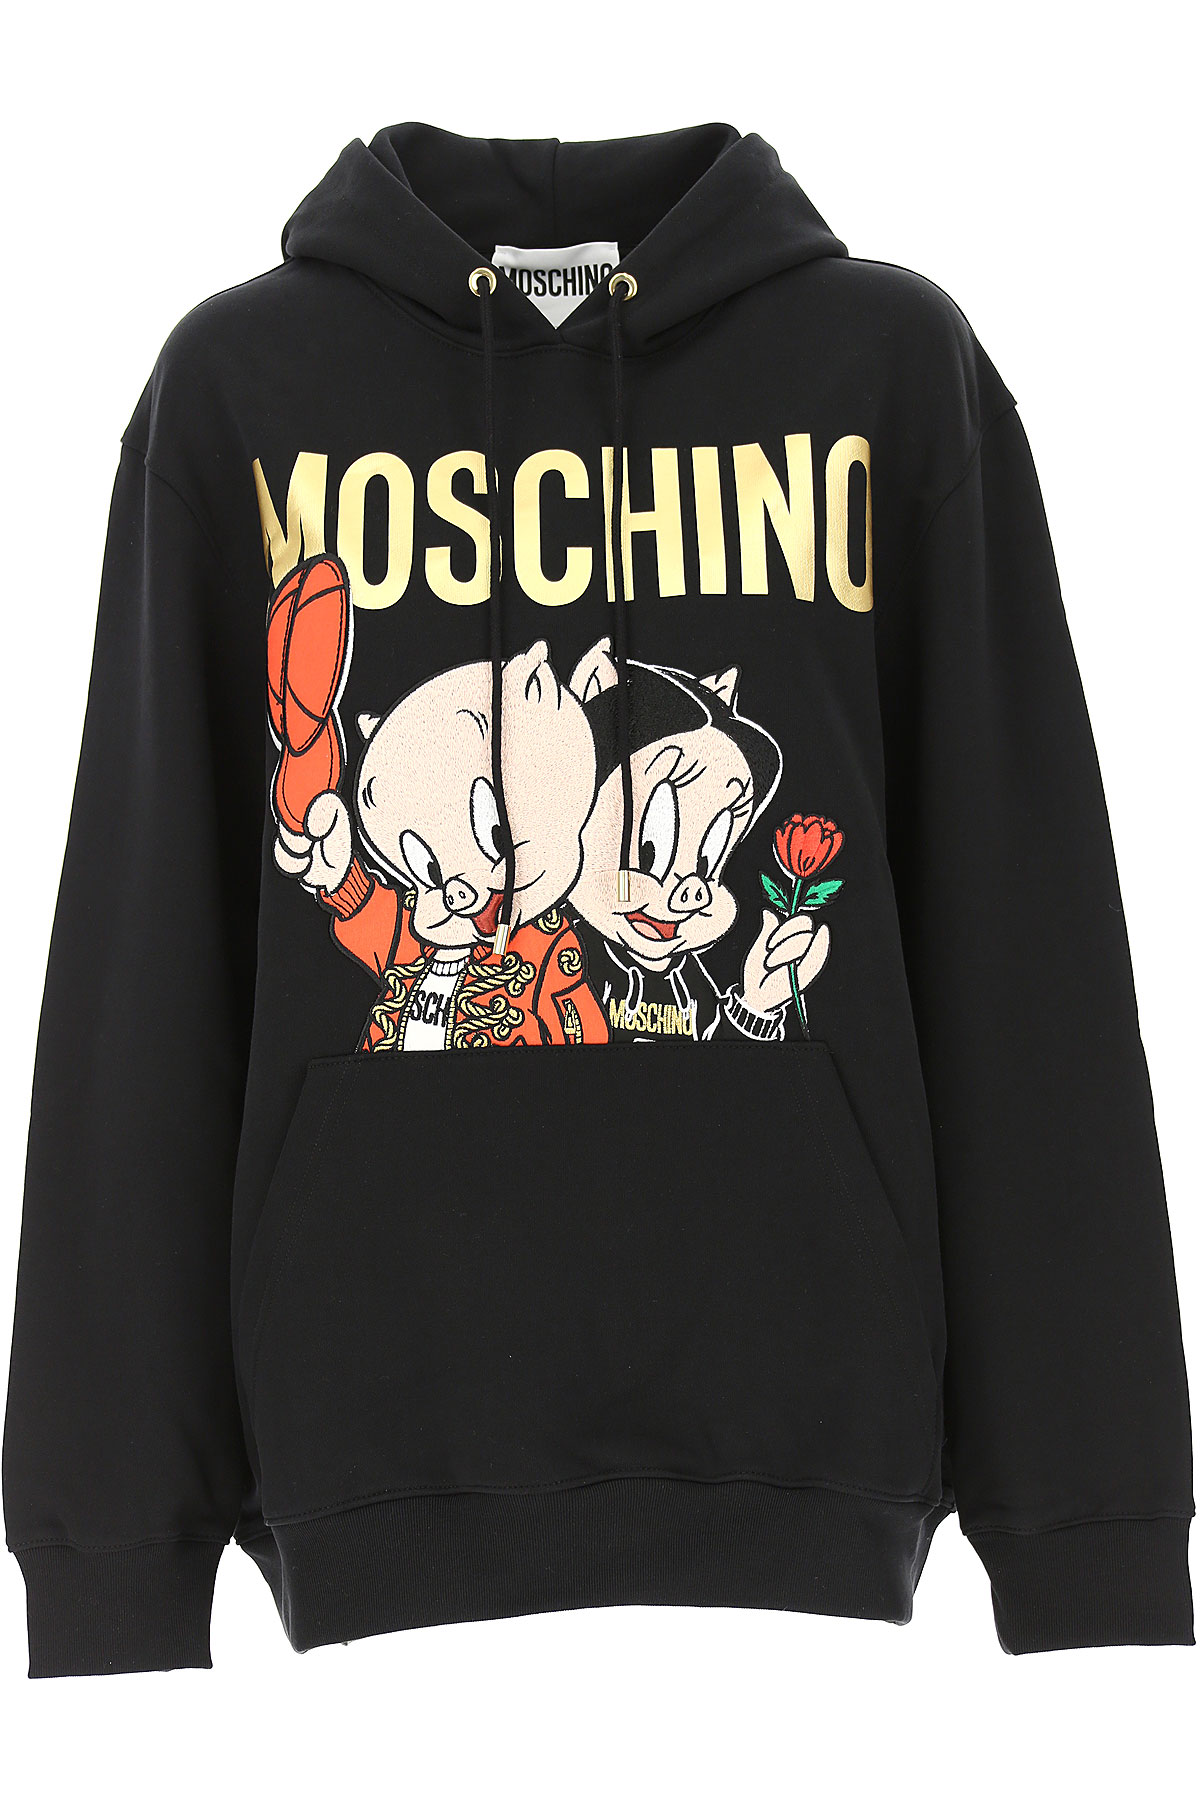 Womens Clothing Moschino, Style code: a1779-1027-a1555